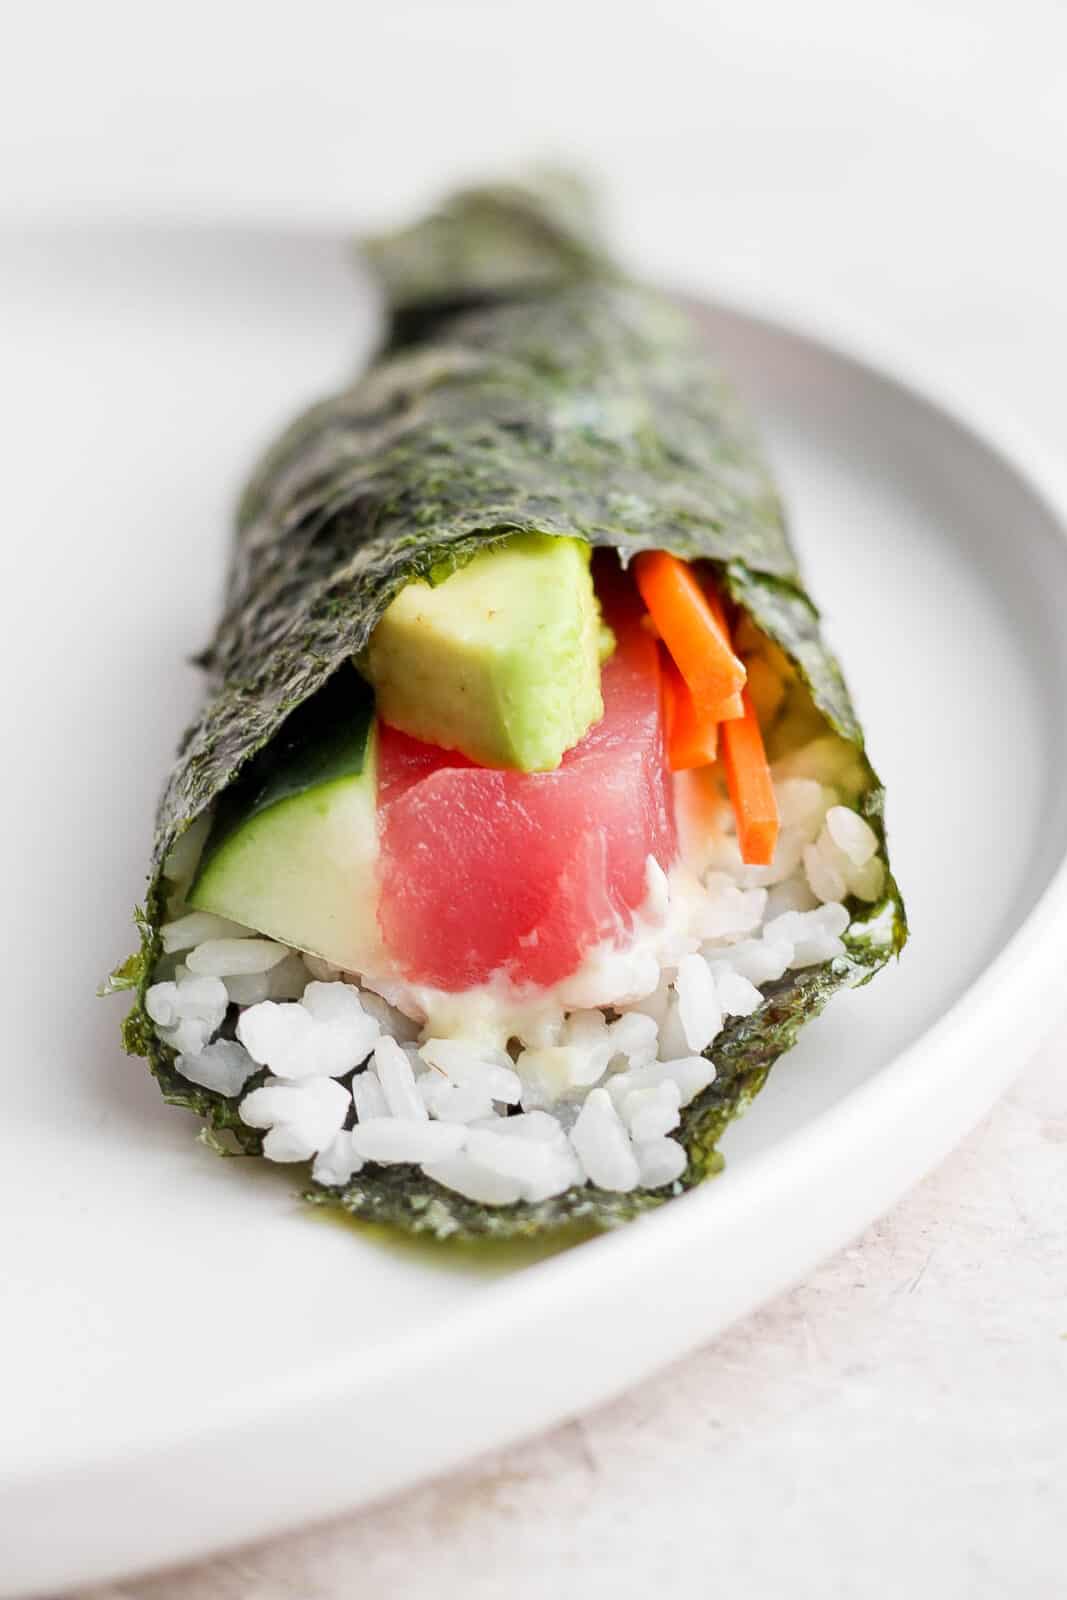 A sushi hand roll on a plate.